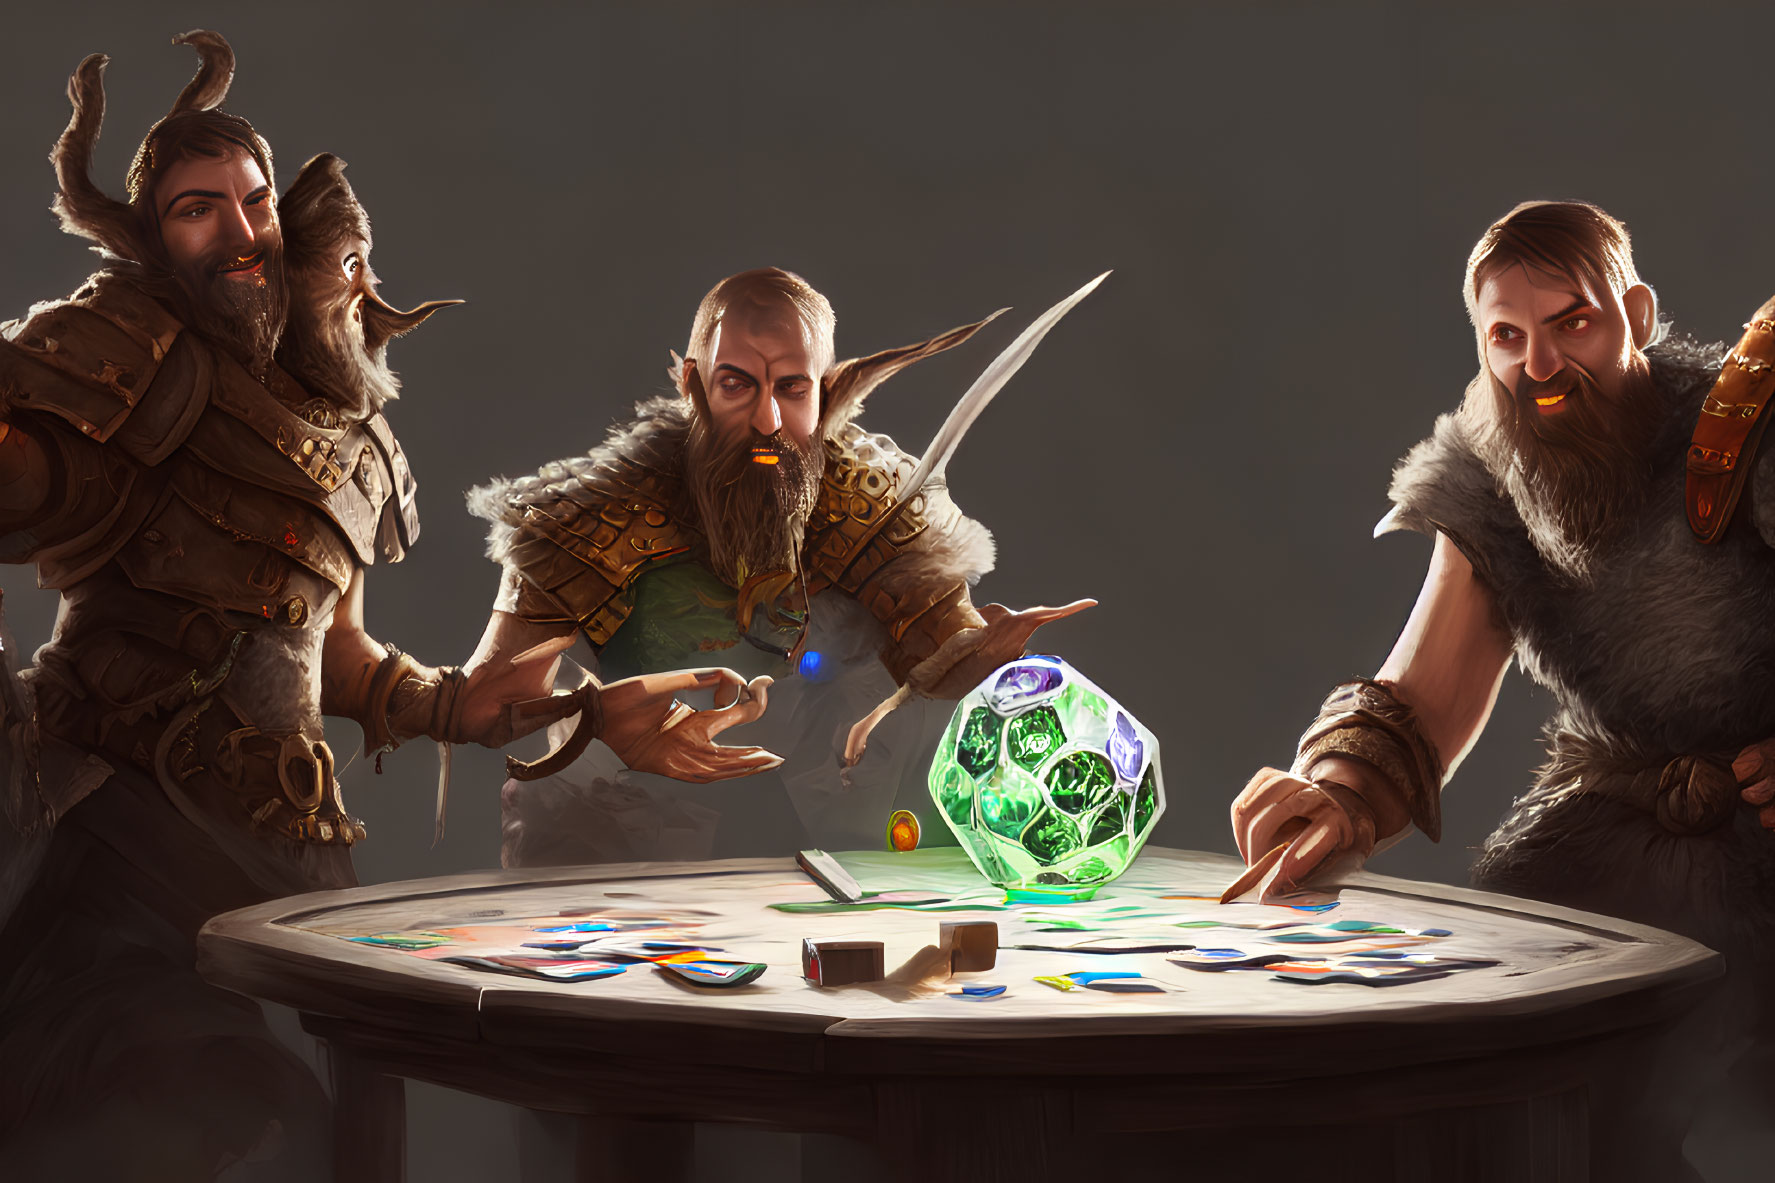 Three dwarf-like animated characters playing board game with magical artifact